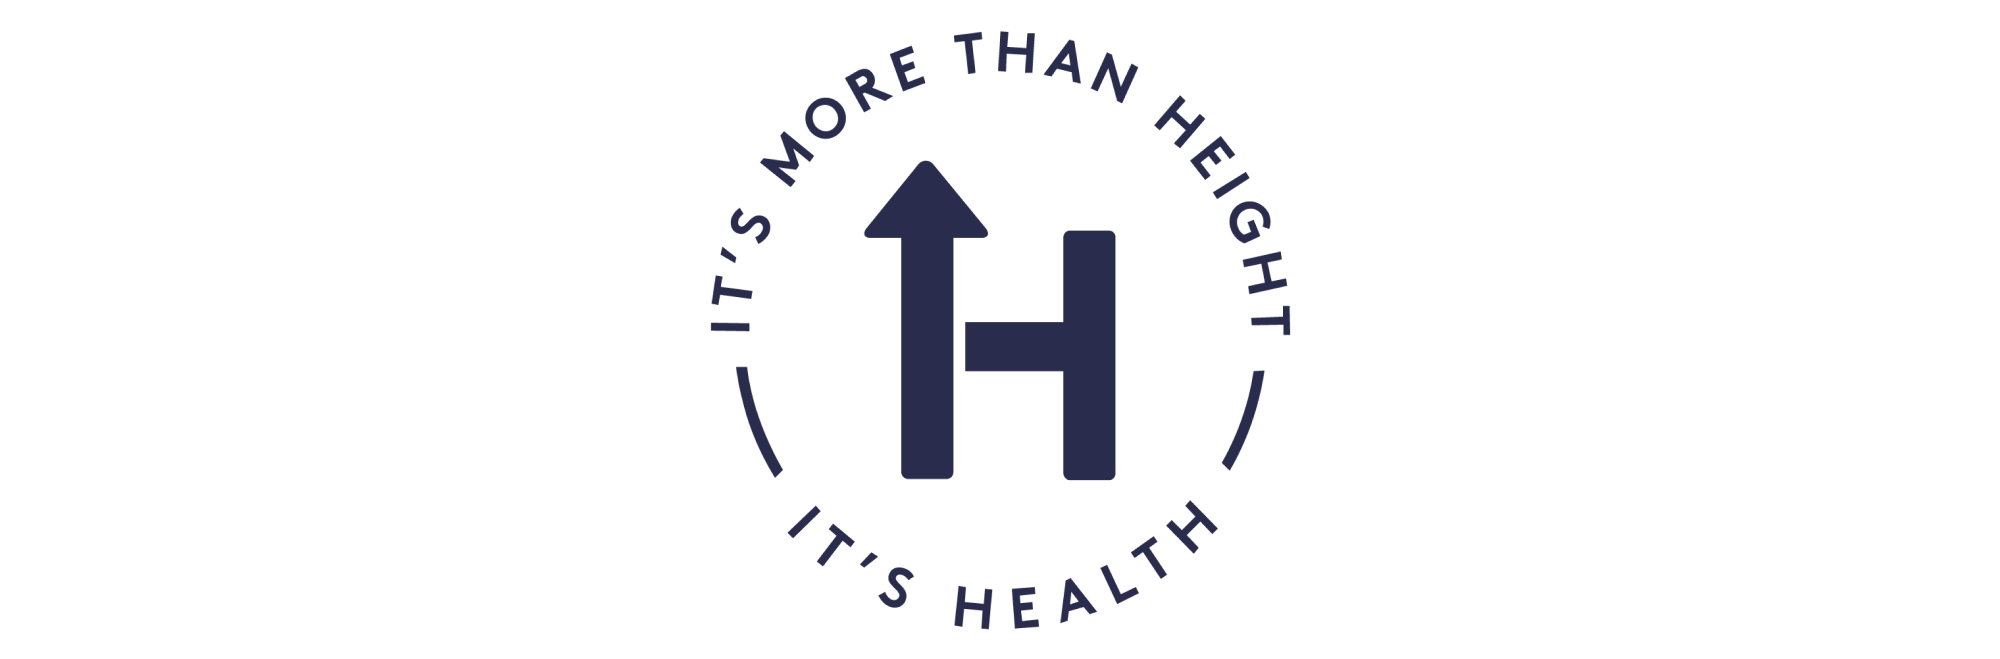 Visit More Than Height